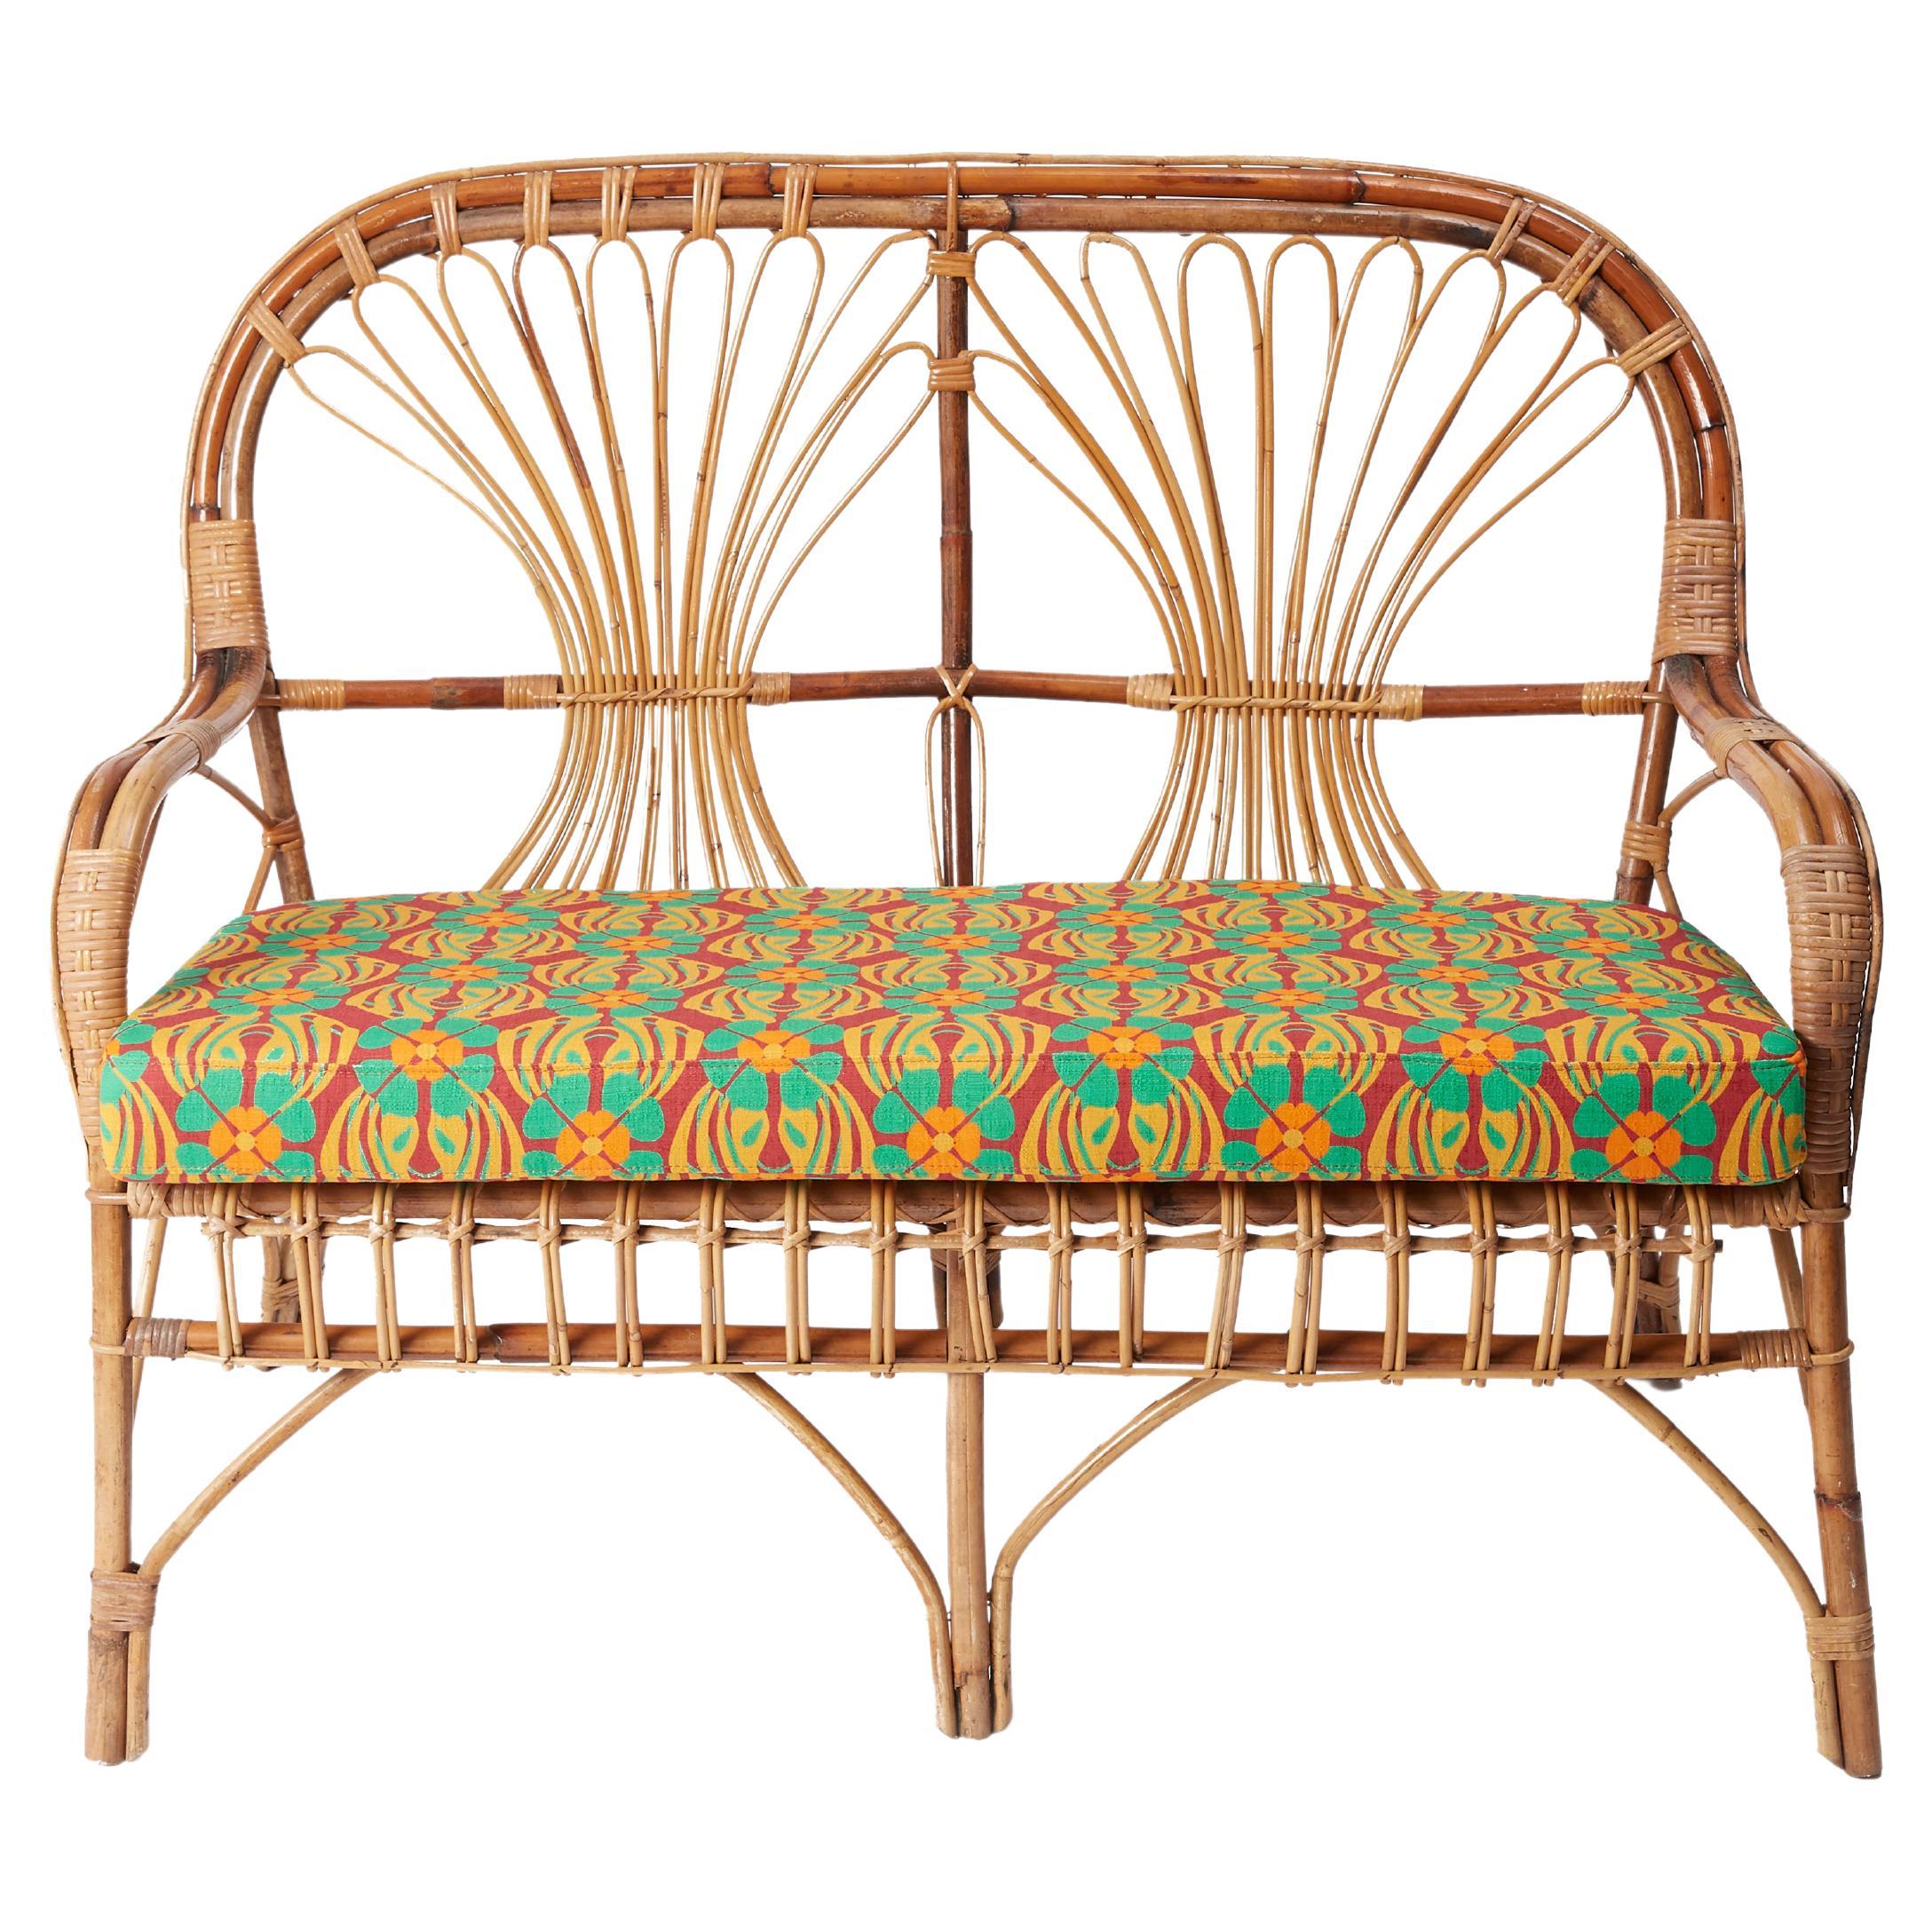 Vintage Bamboo Sofa by La DoubleJ, Cubi Print in Linen-Feel Shot Cotton, 1960 For Sale